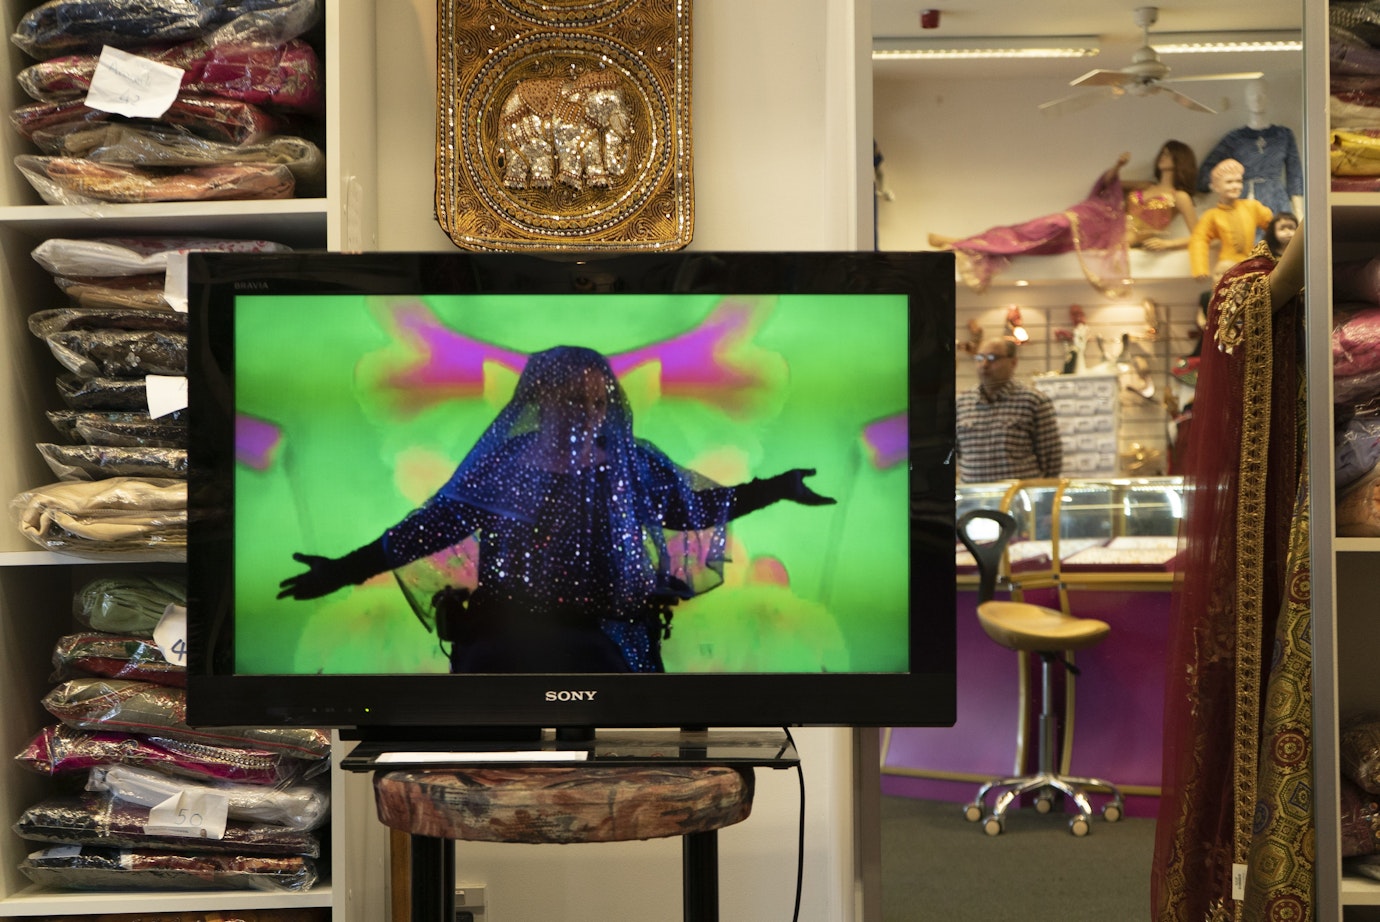 An installation of a video artwork on a monitor in a shop. The shops sells colurful Indian fashion. The woman in the video dances in brightly coloured clothing.